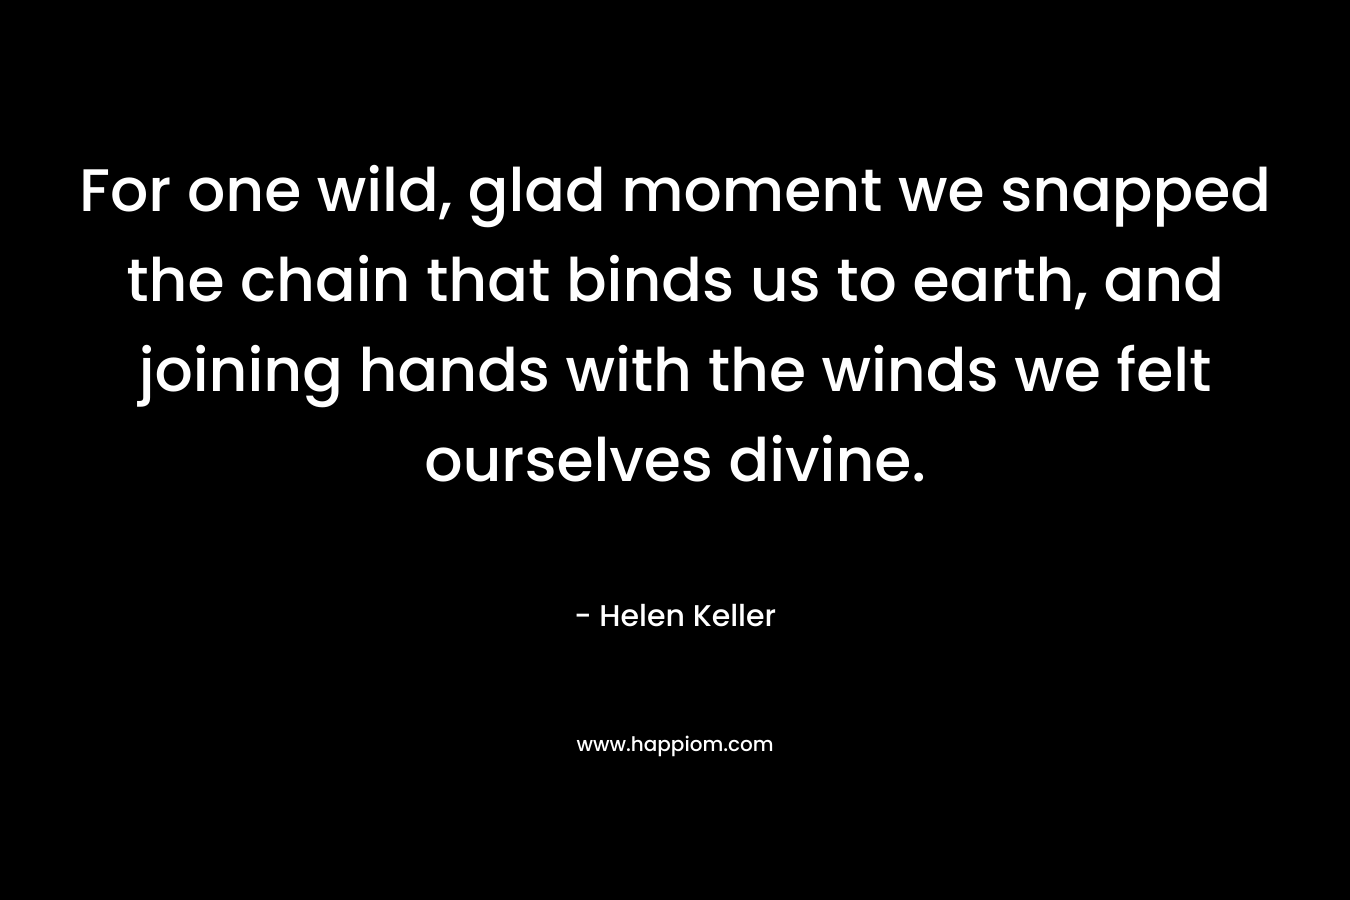 For one wild, glad moment we snapped the chain that binds us to earth, and joining hands with the winds we felt ourselves divine. – Helen Keller